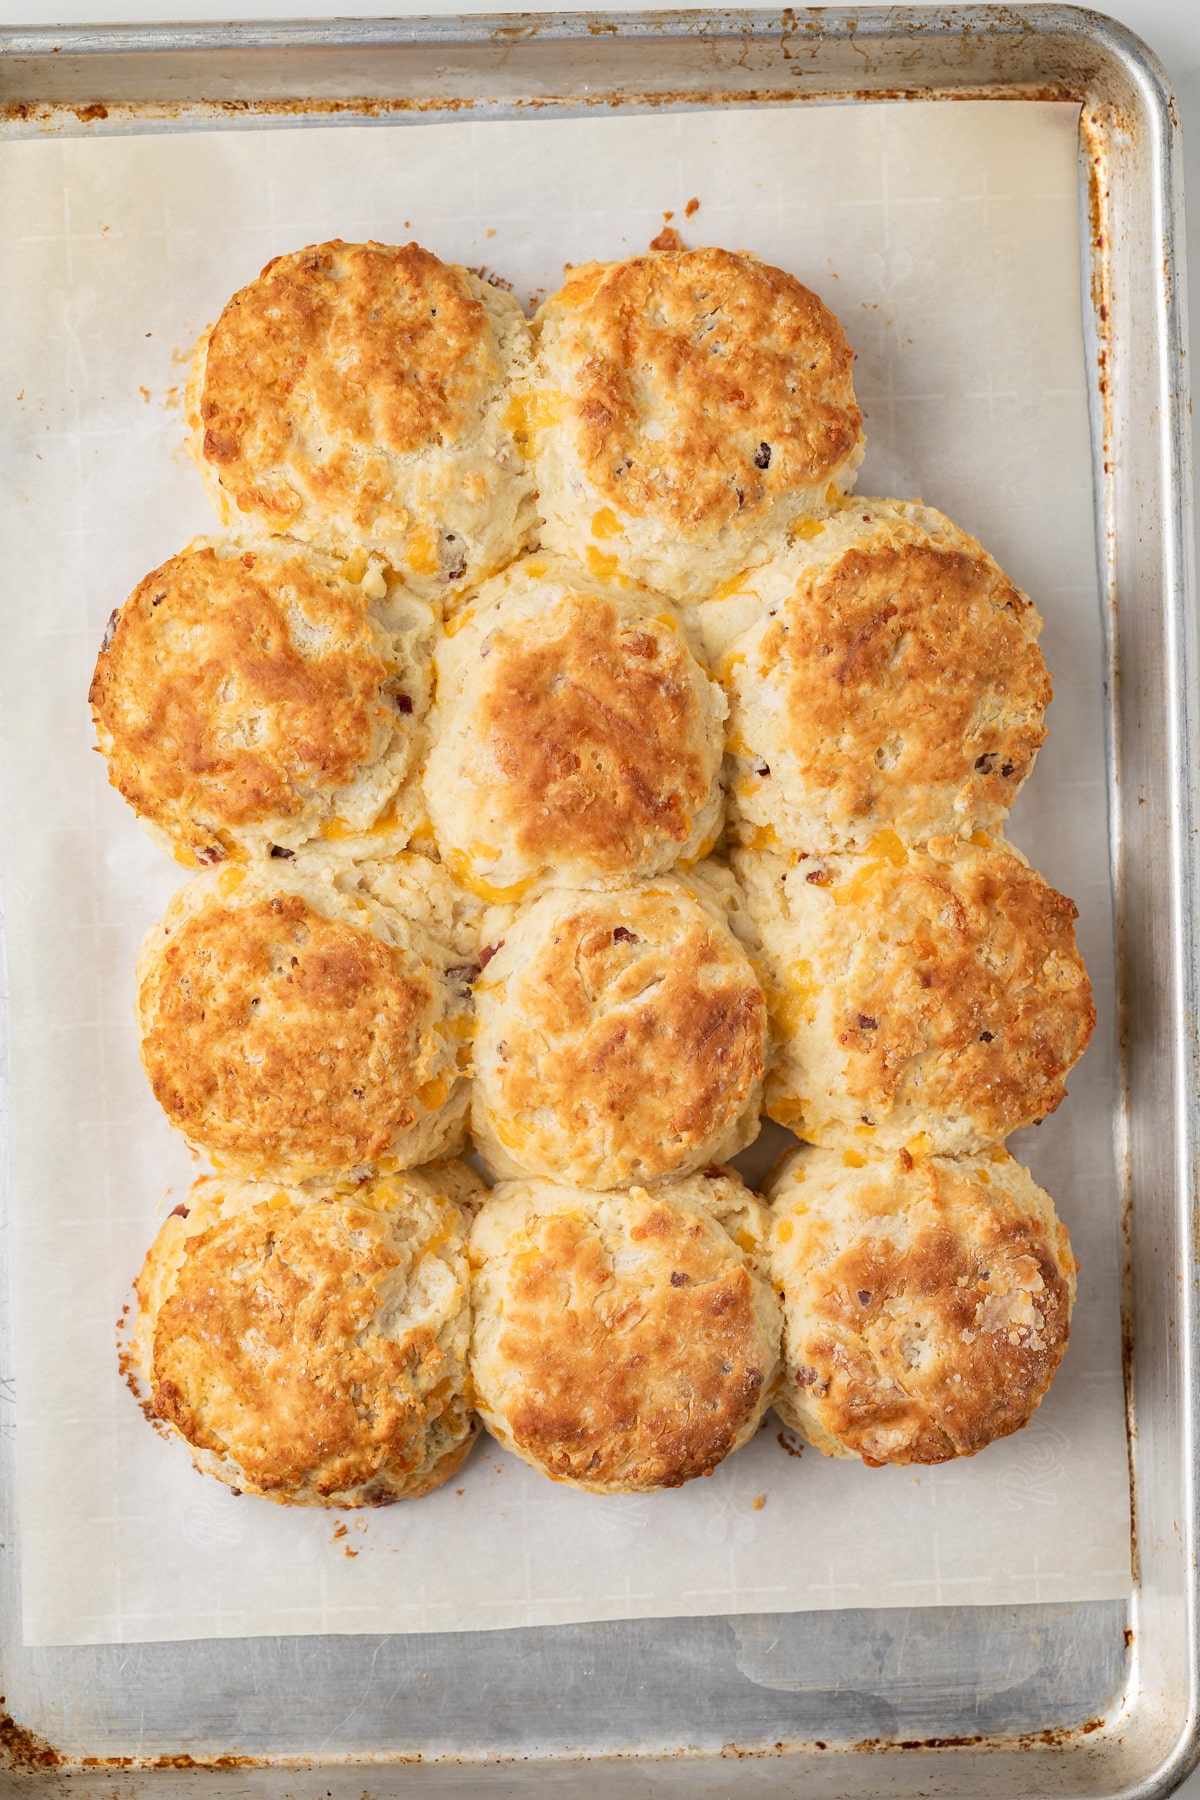 Baked bacon cheddar biscuits on a baking sheet.